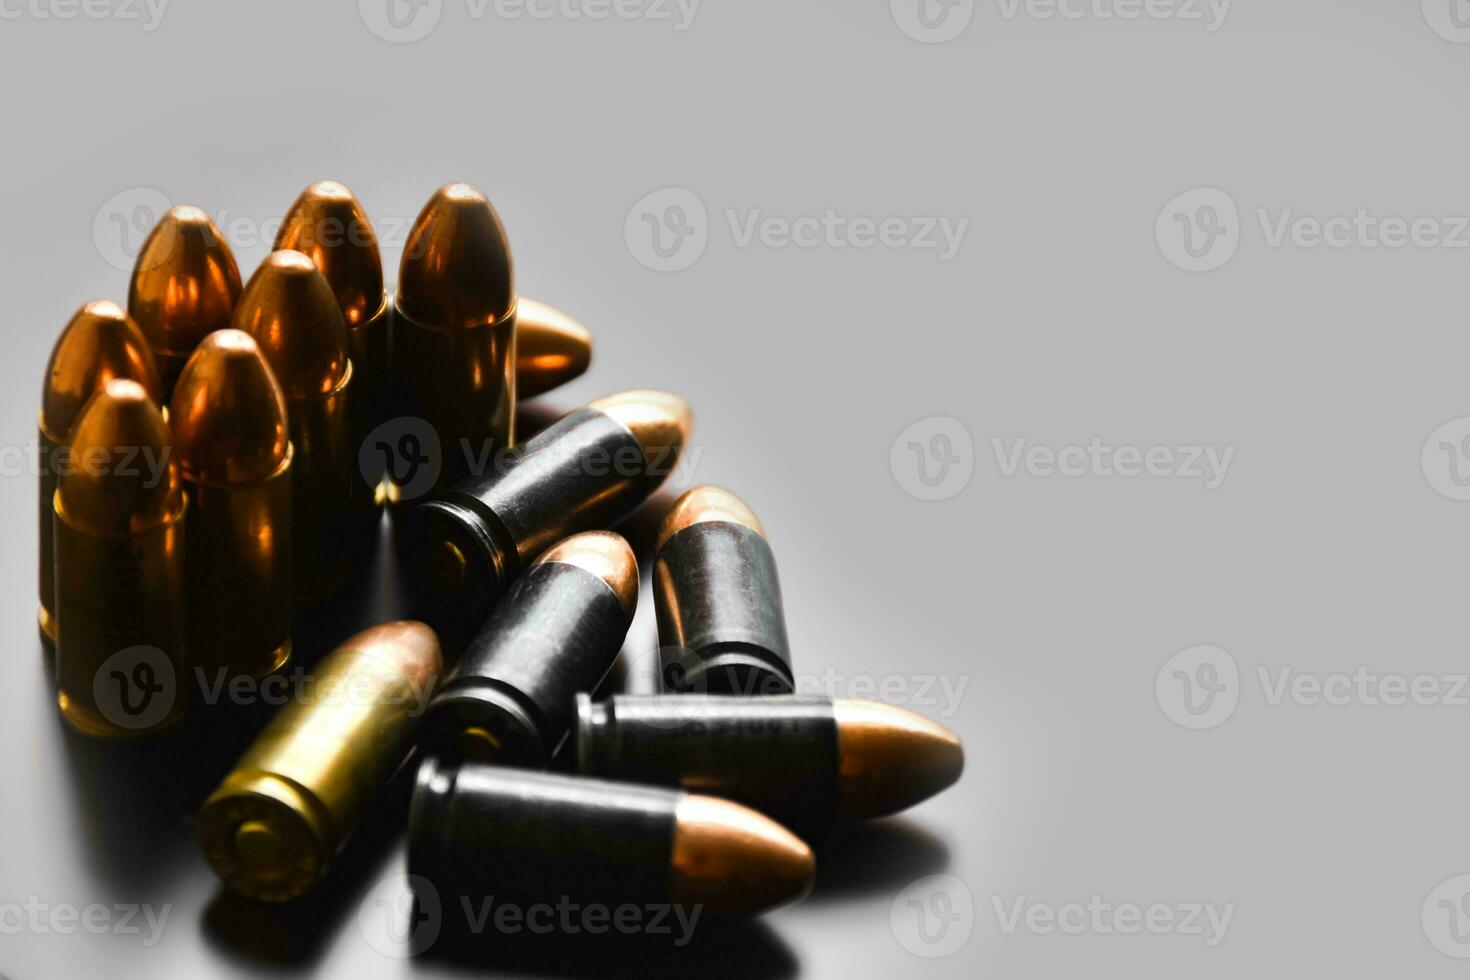 9mm pistol gun bullets on dark leather background, soft focus, new edited, concept for shooting sports and training to protect human life and property around the world. photo